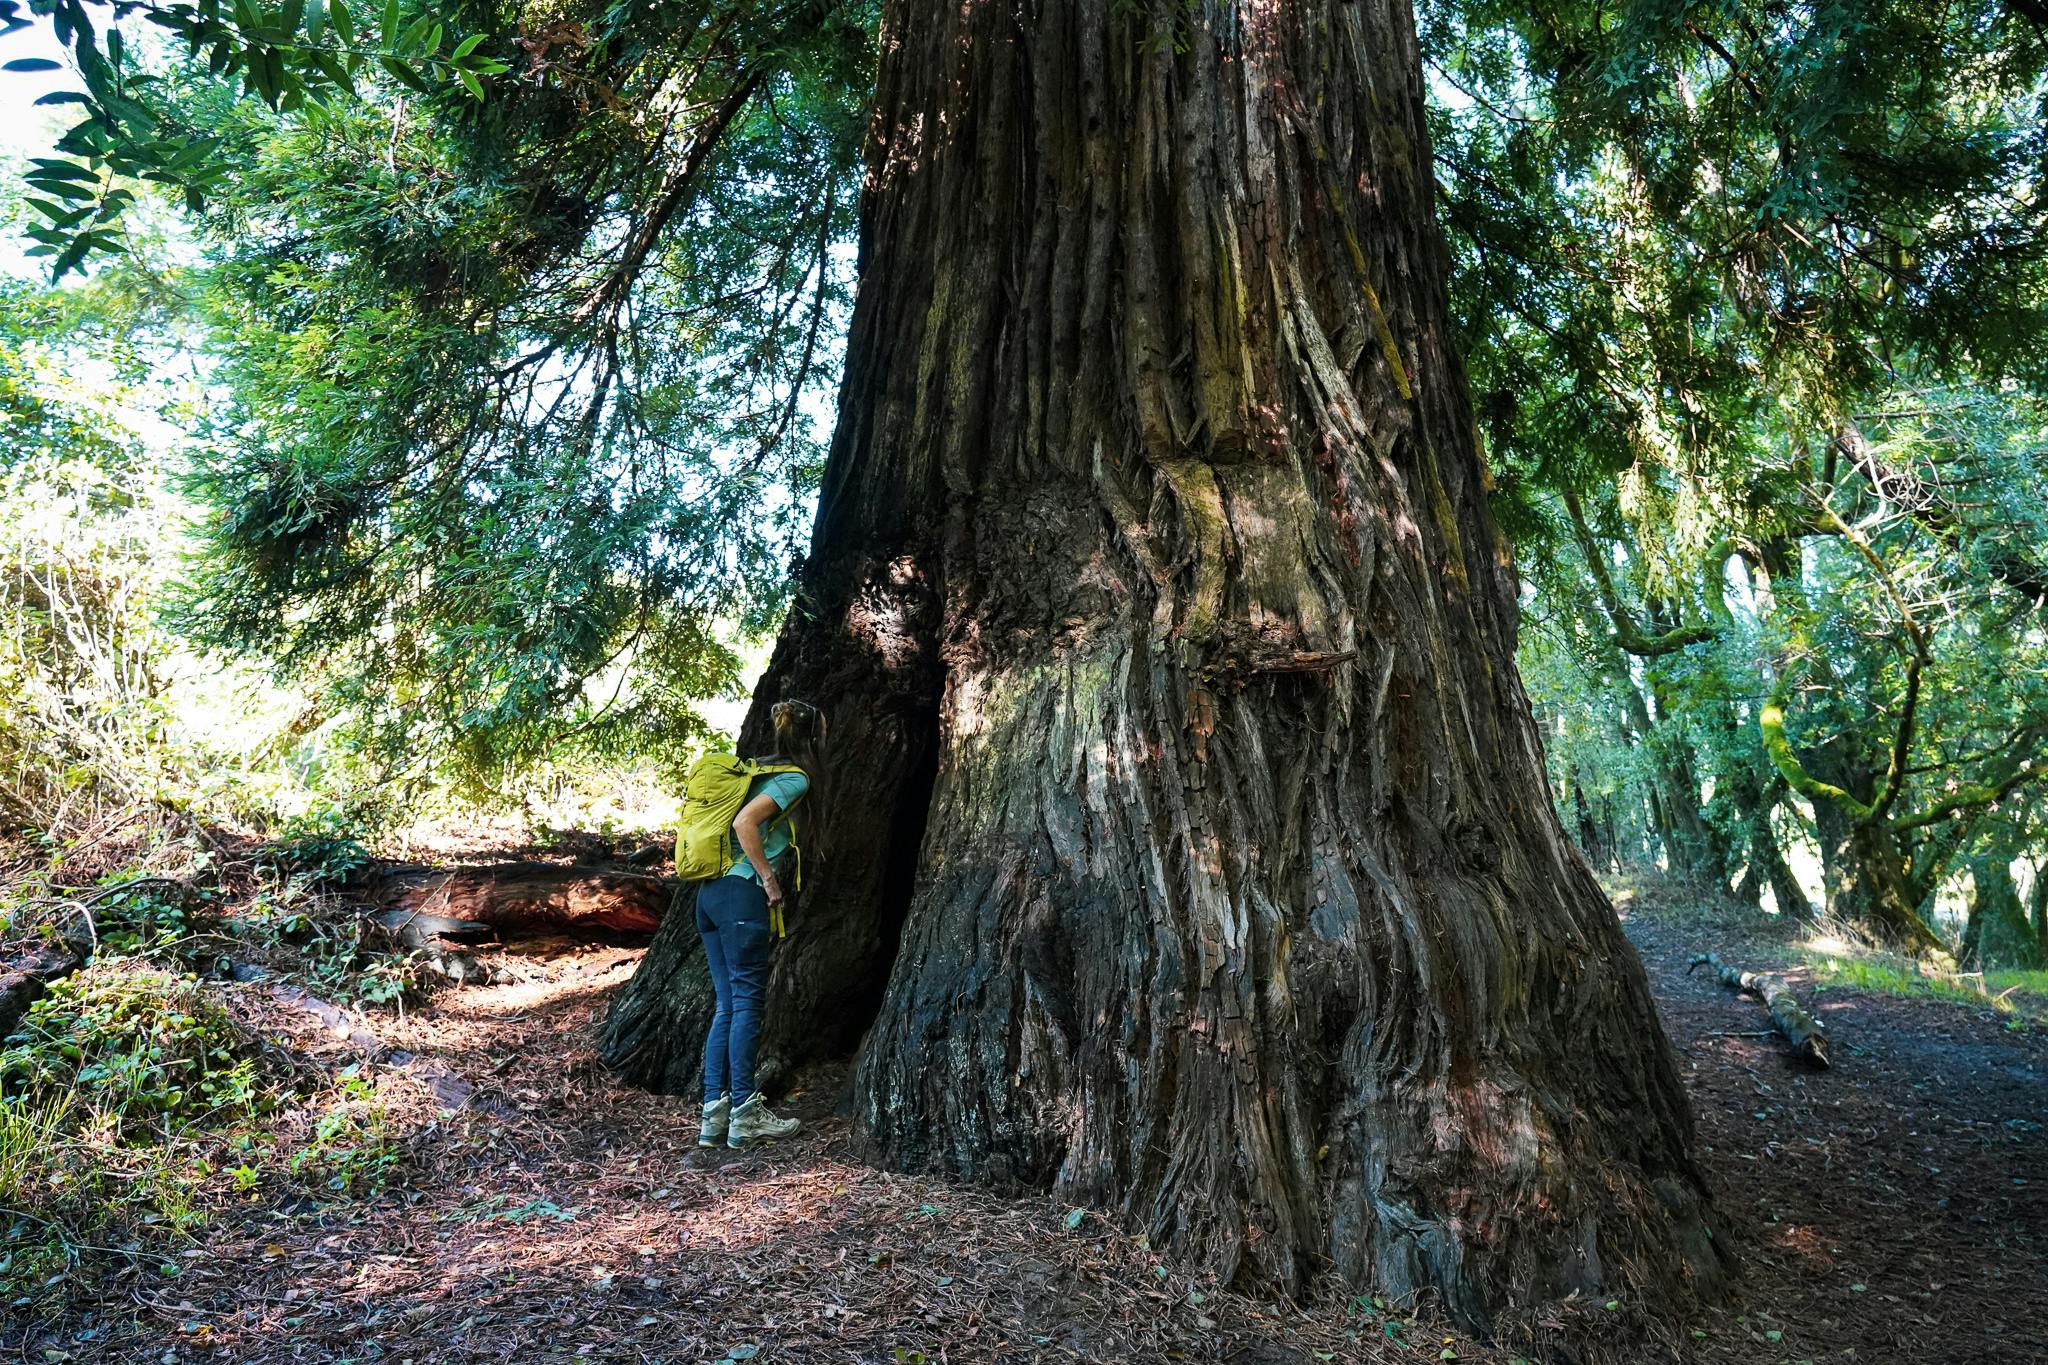 Woman looking into a cavernous redwood tree at Samuel P Taylor State Park in Marin